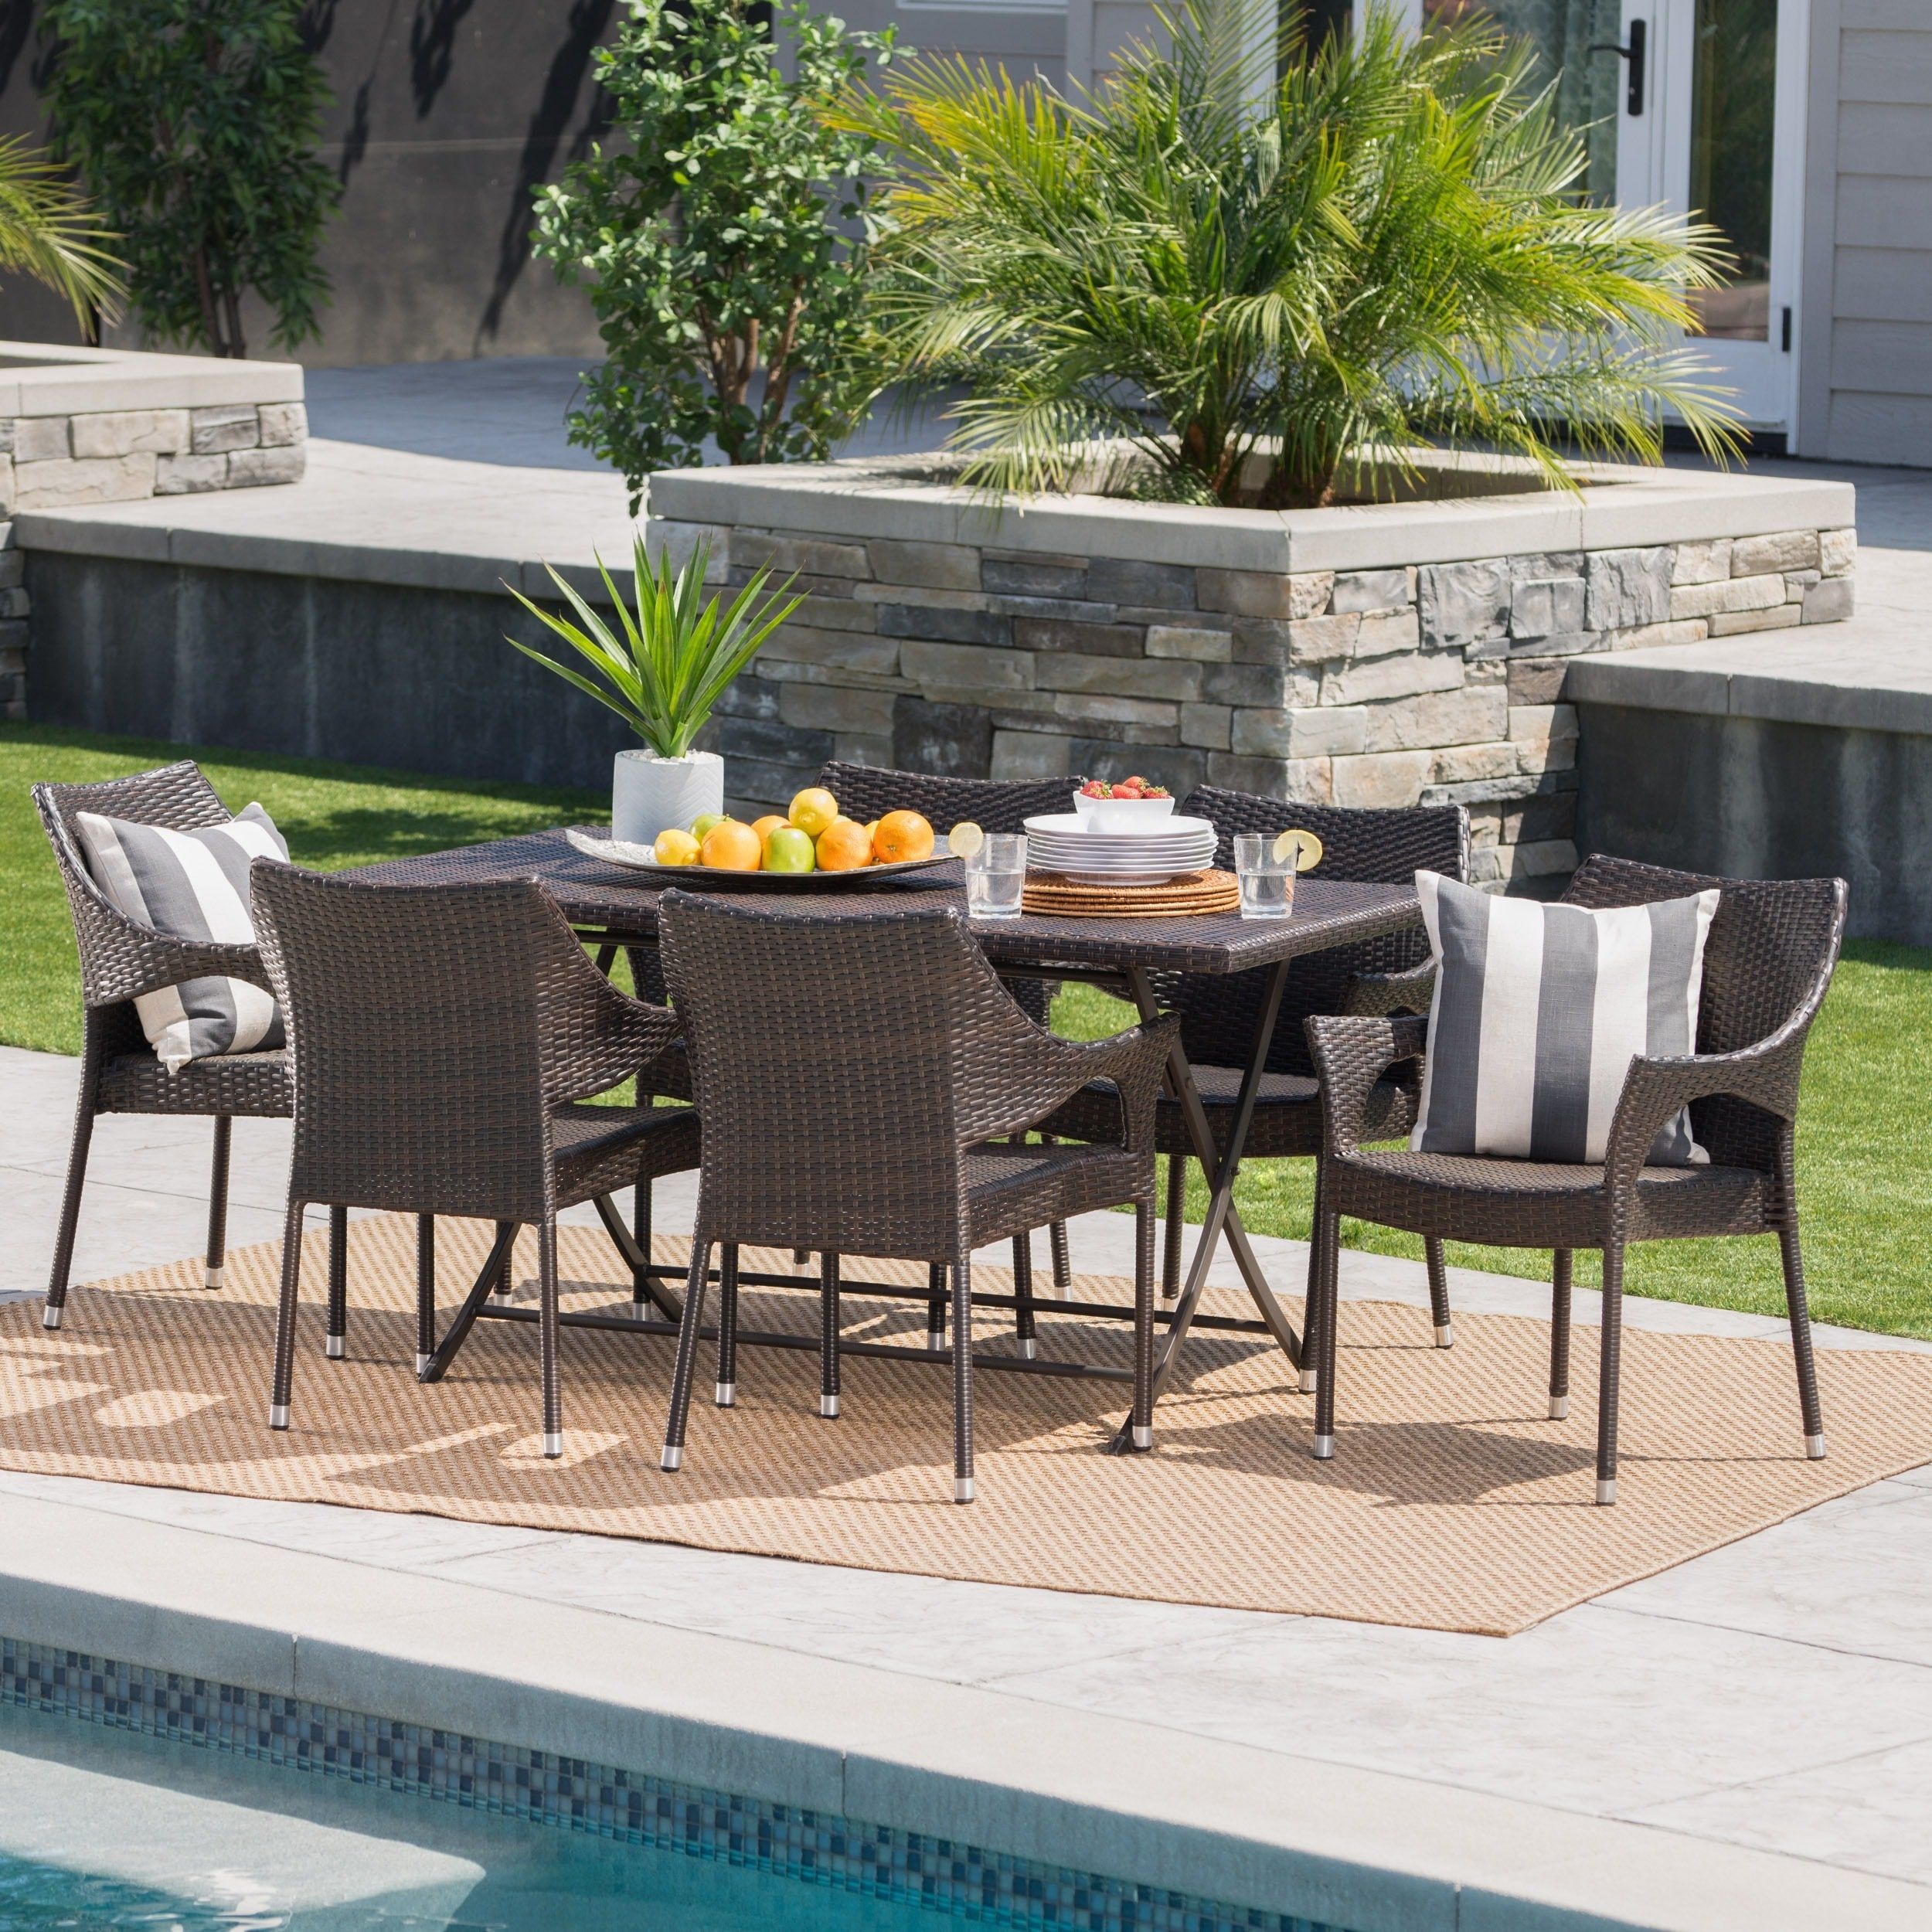 Christopher Knight Home Darcy Outdoor 7 Piece Rectangle Foldable Wicker Regarding Large Rectangular Patio Dining Sets (View 1 of 15)